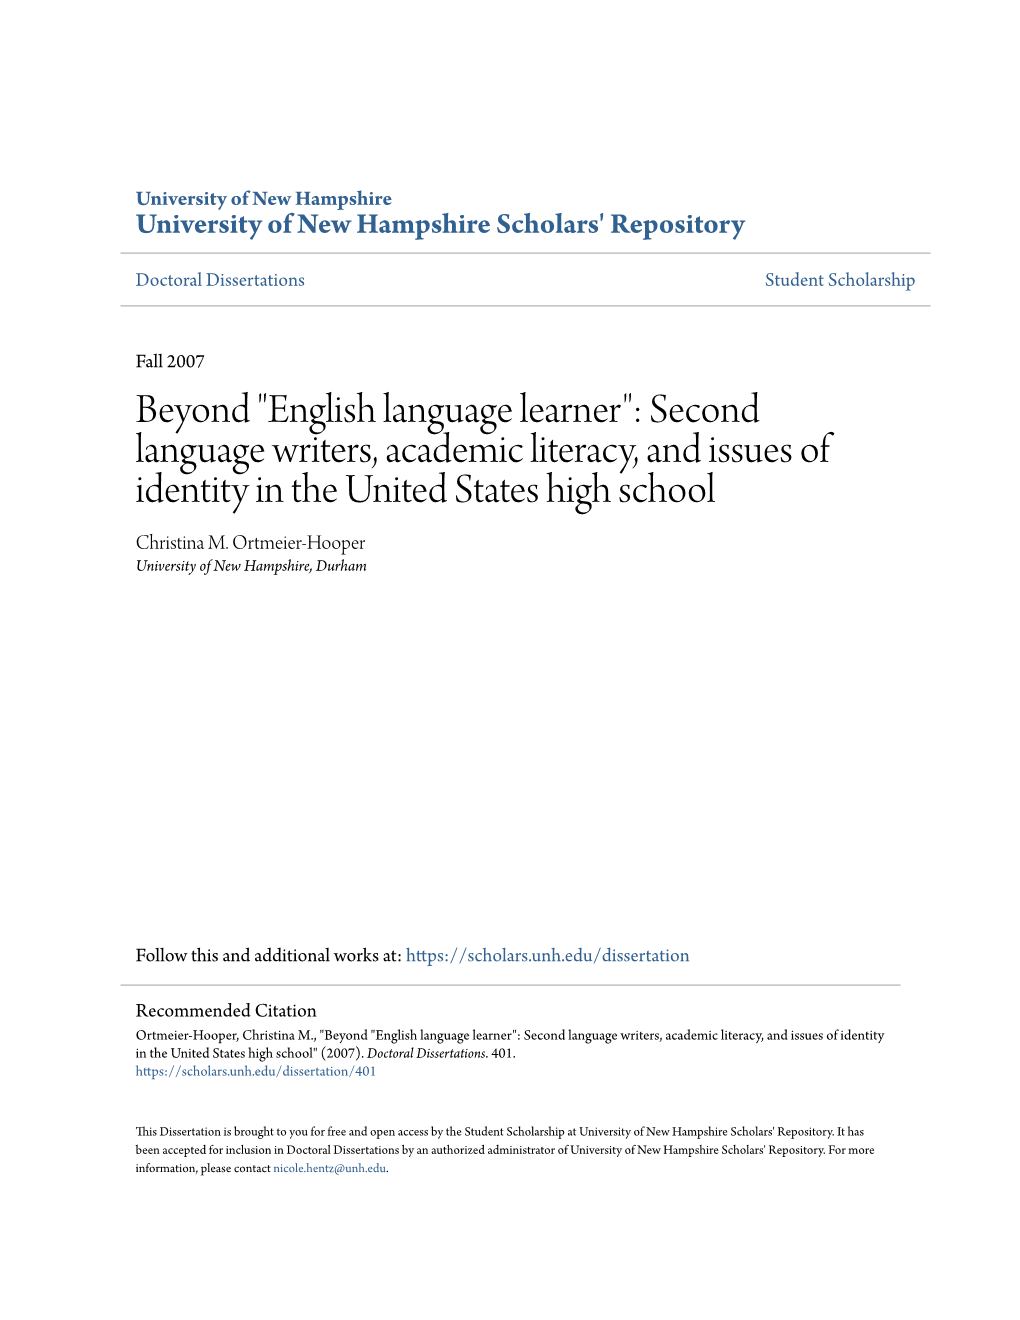 English Language Learner": Second Language Writers, Academic Literacy, and Issues of Identity in the United States High School Christina M